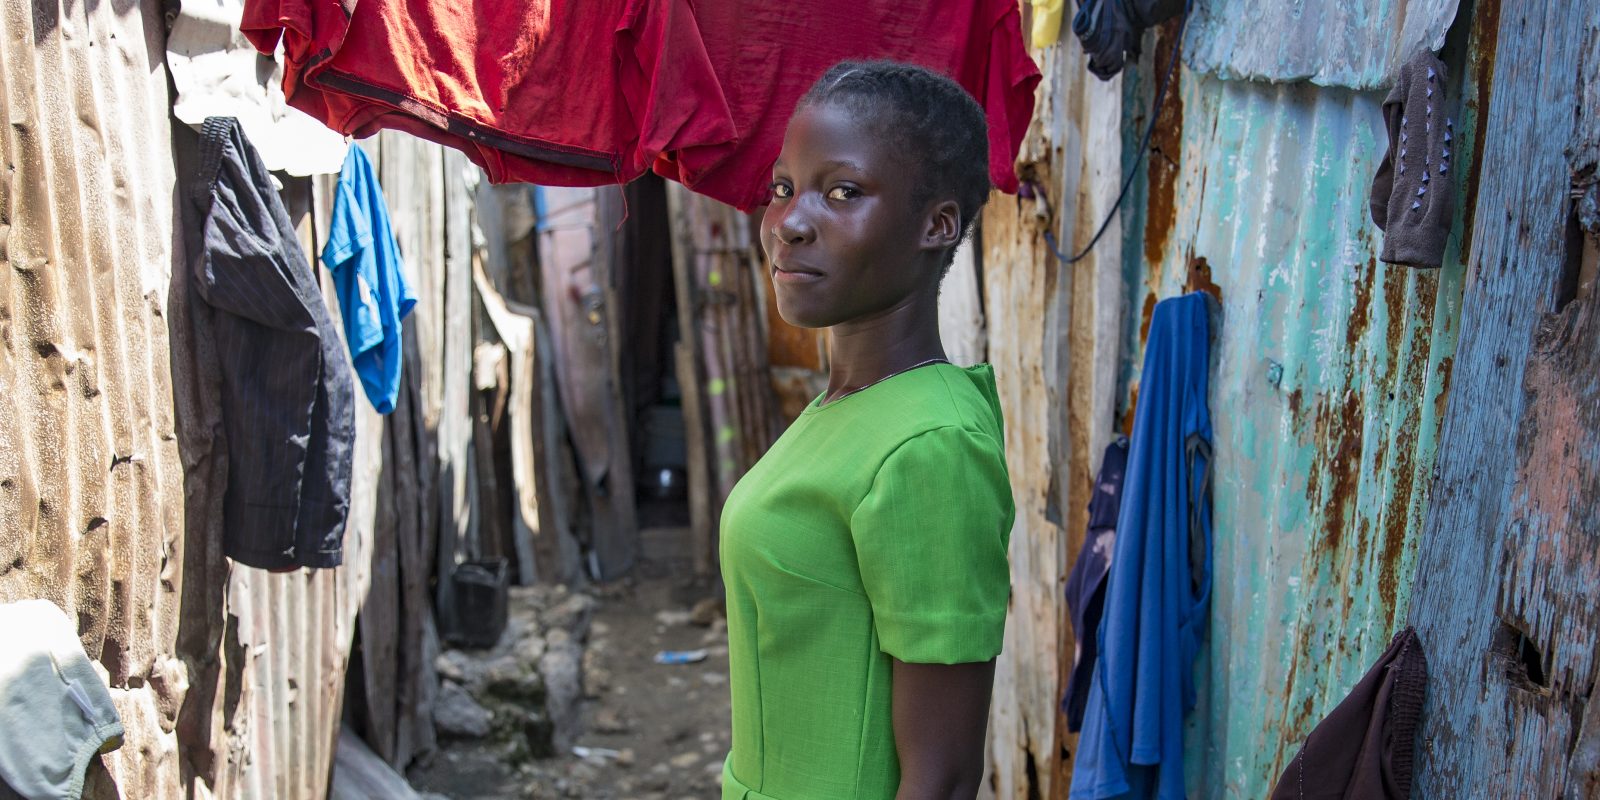 Émanise proudly wearing the lime green dress she tailored during a course run by Concern.